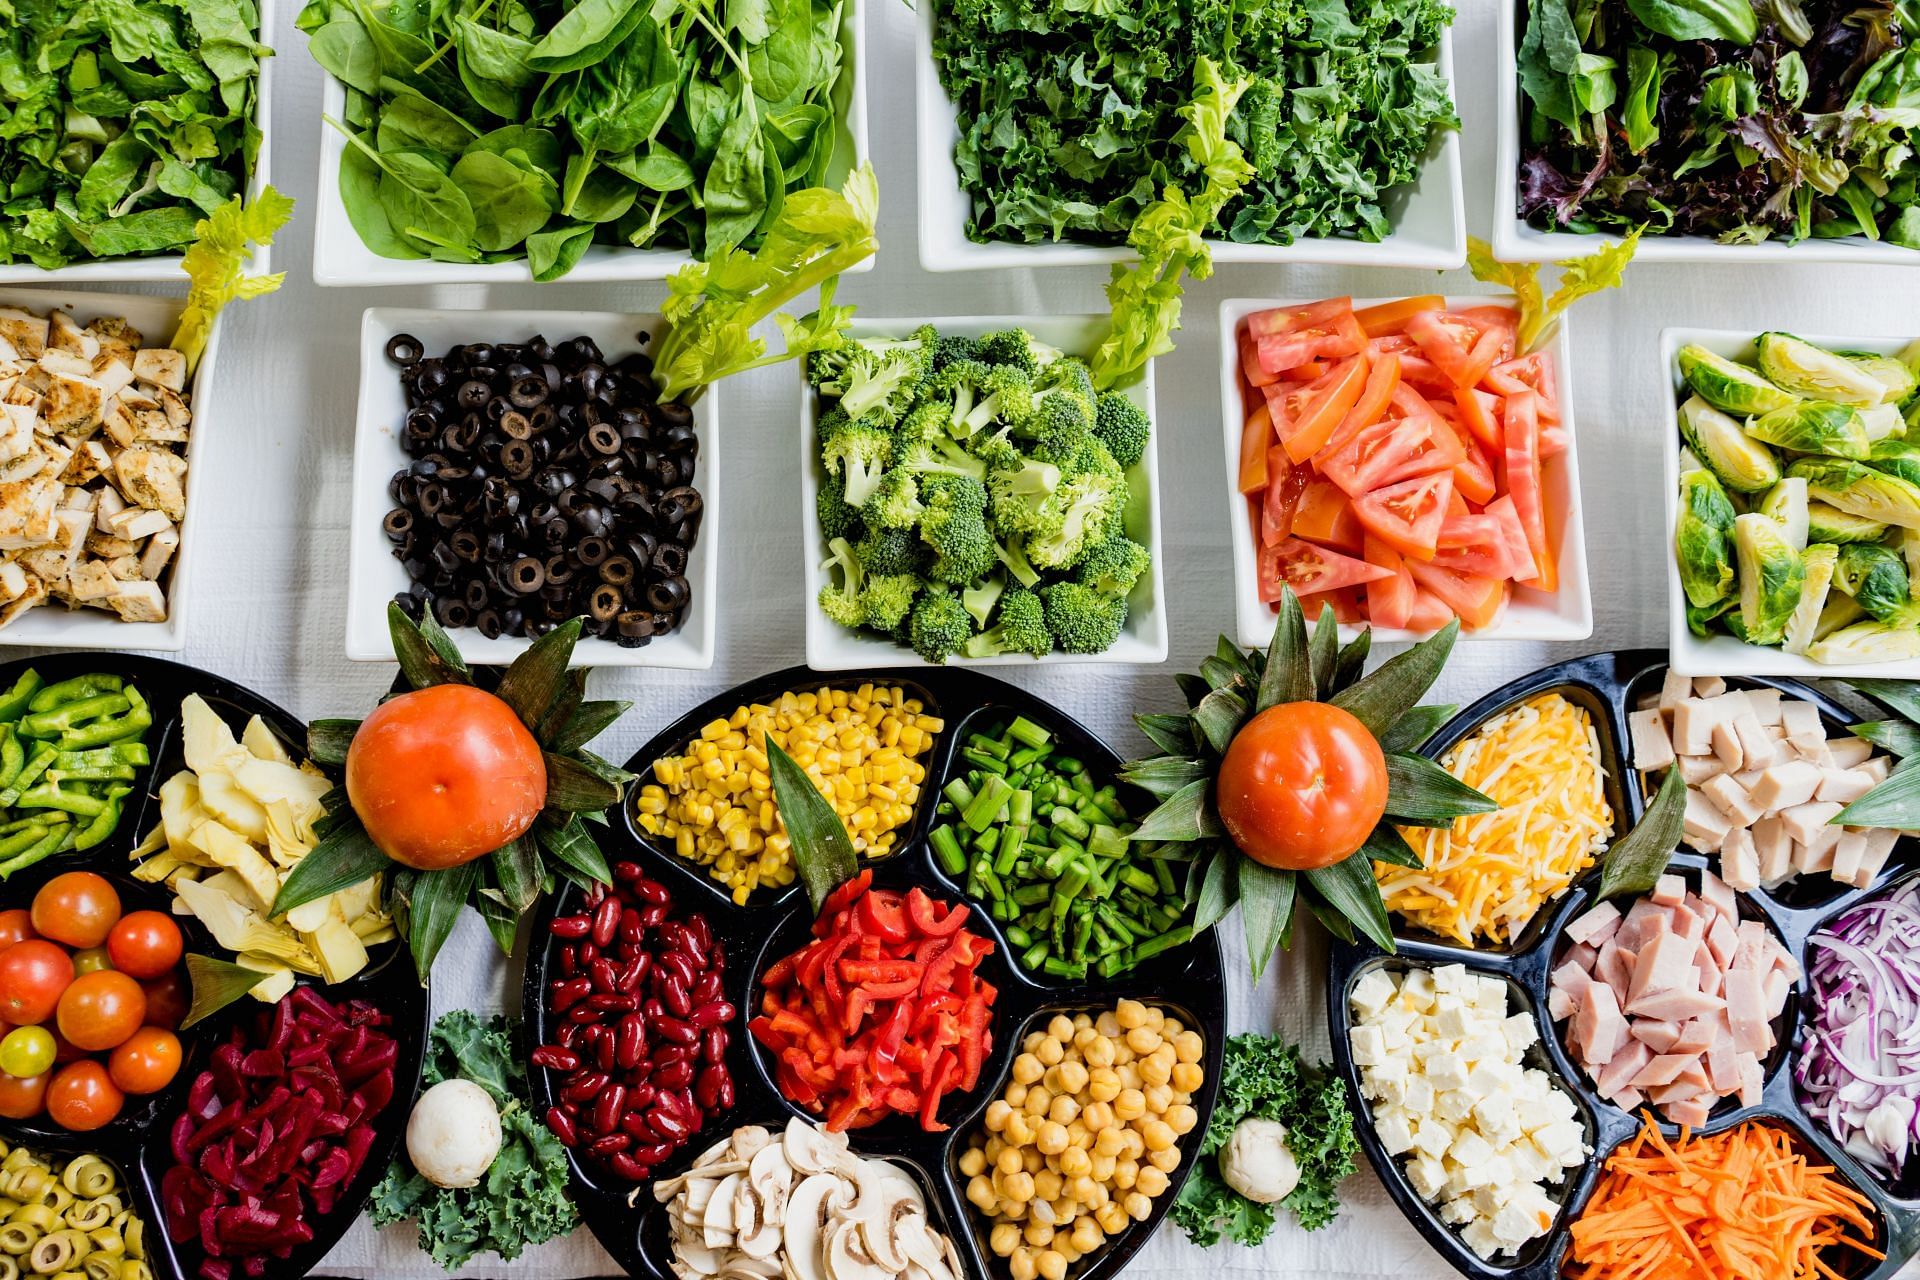 Vegetables high in fiber can help you to lose weight. (Image via Unsplash / Dan Gold)